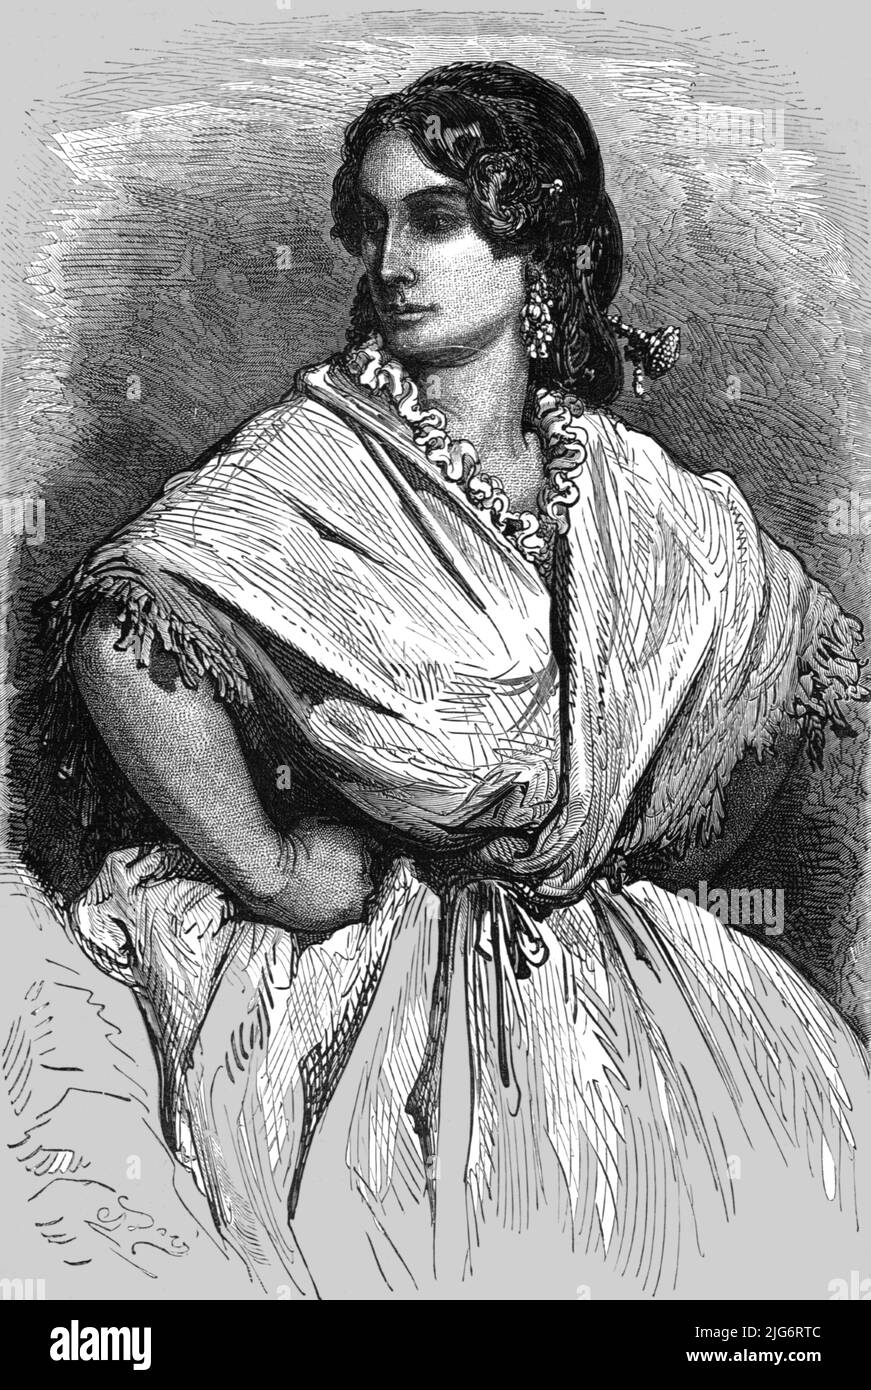 'Young Woman of Valencia; An Autumn Tour in Andalusia', 1875. [Spanish woman]. From, 'Illustrated Travels' by H.W. Bates. [Cassell, Petter, and Galpin, c1880, London] Belle Sauvage Works.London E.C. Stock Photo